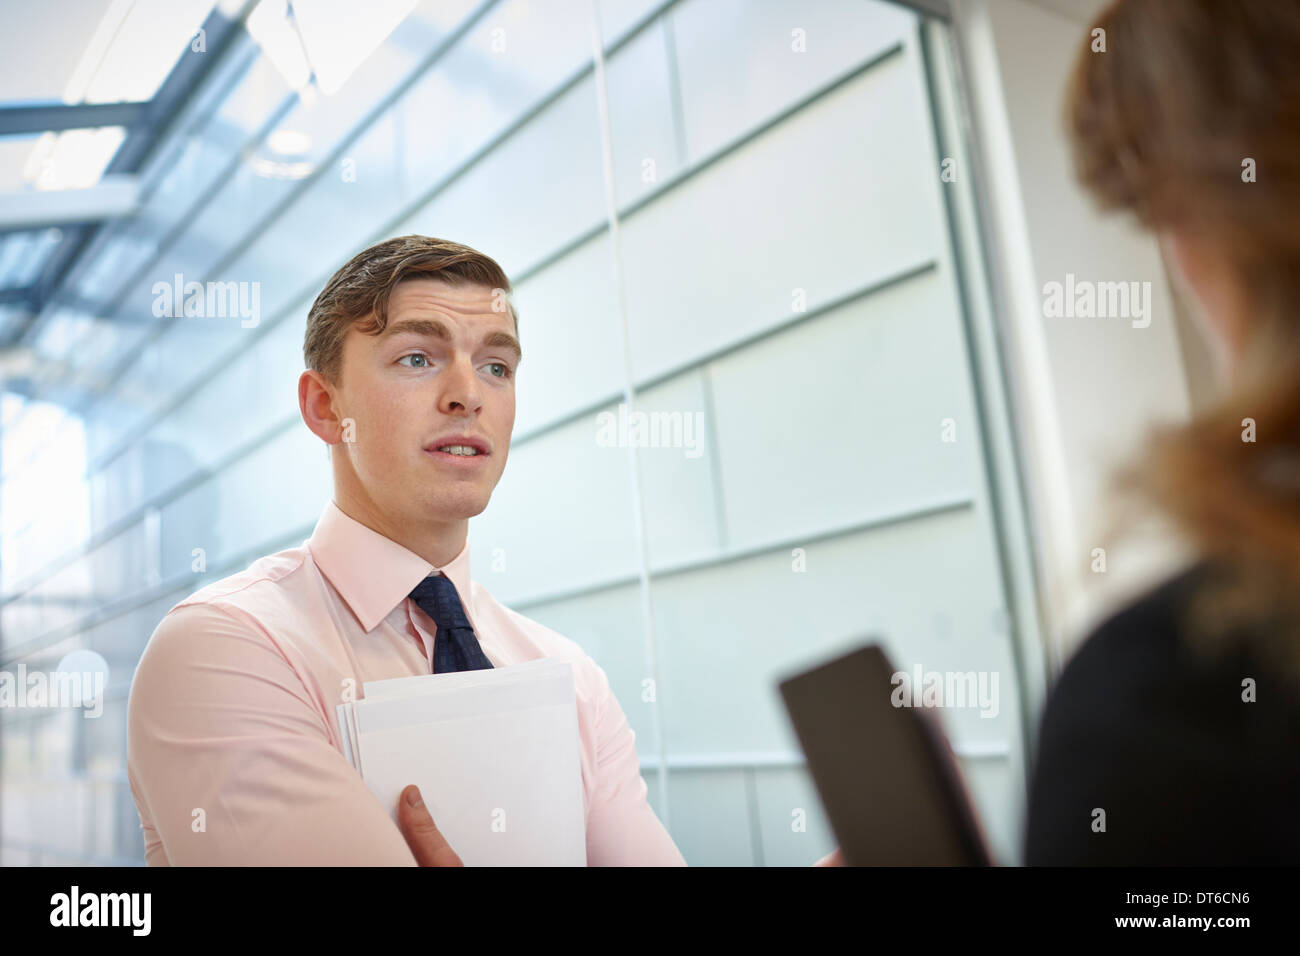 Business colleagues in discussion Stock Photo